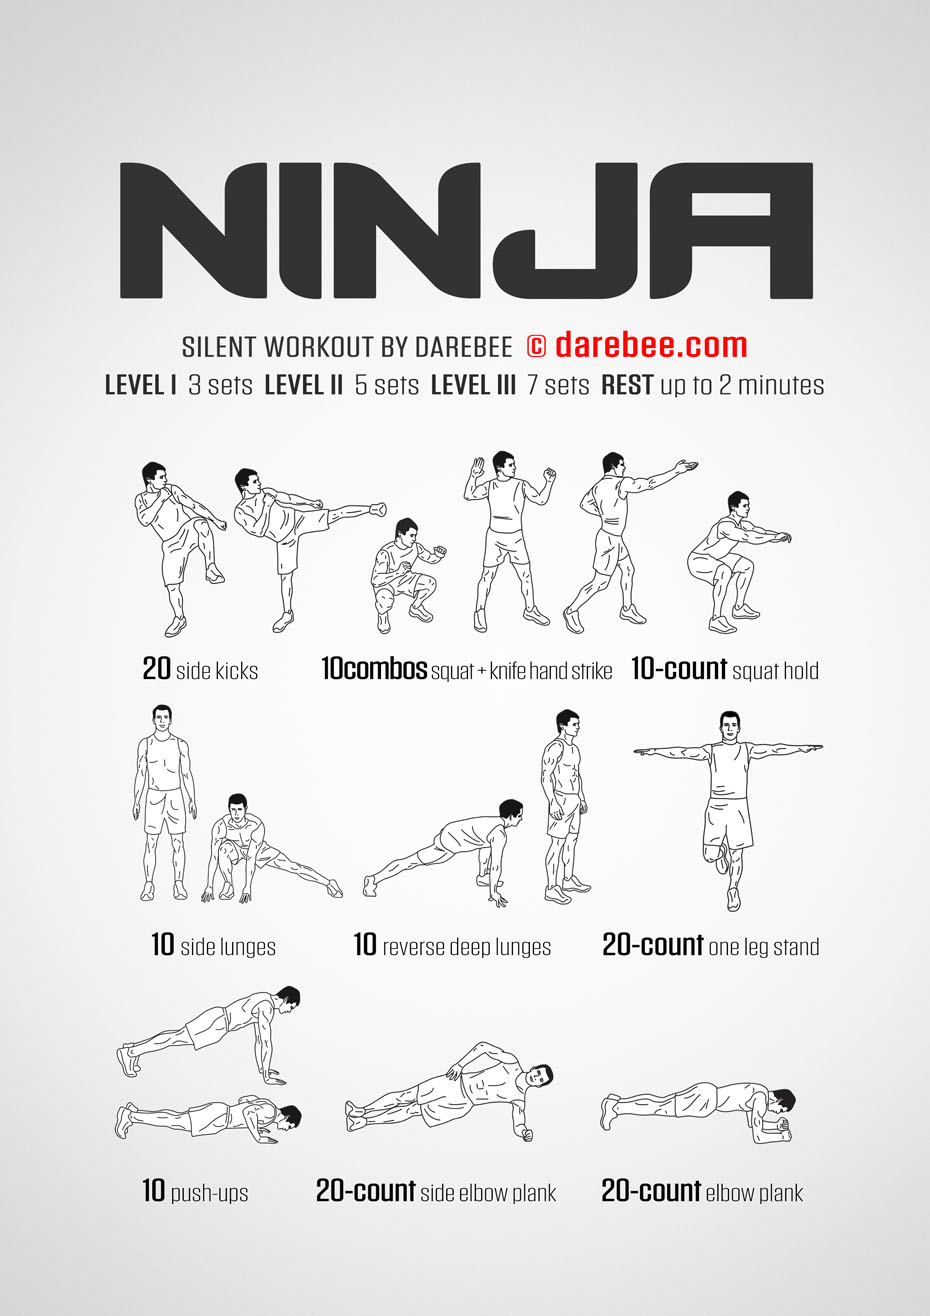 Ninja is a DAREBEE home fitness, no-equipment lower body strength workout that helps you develop speed, power and agility.